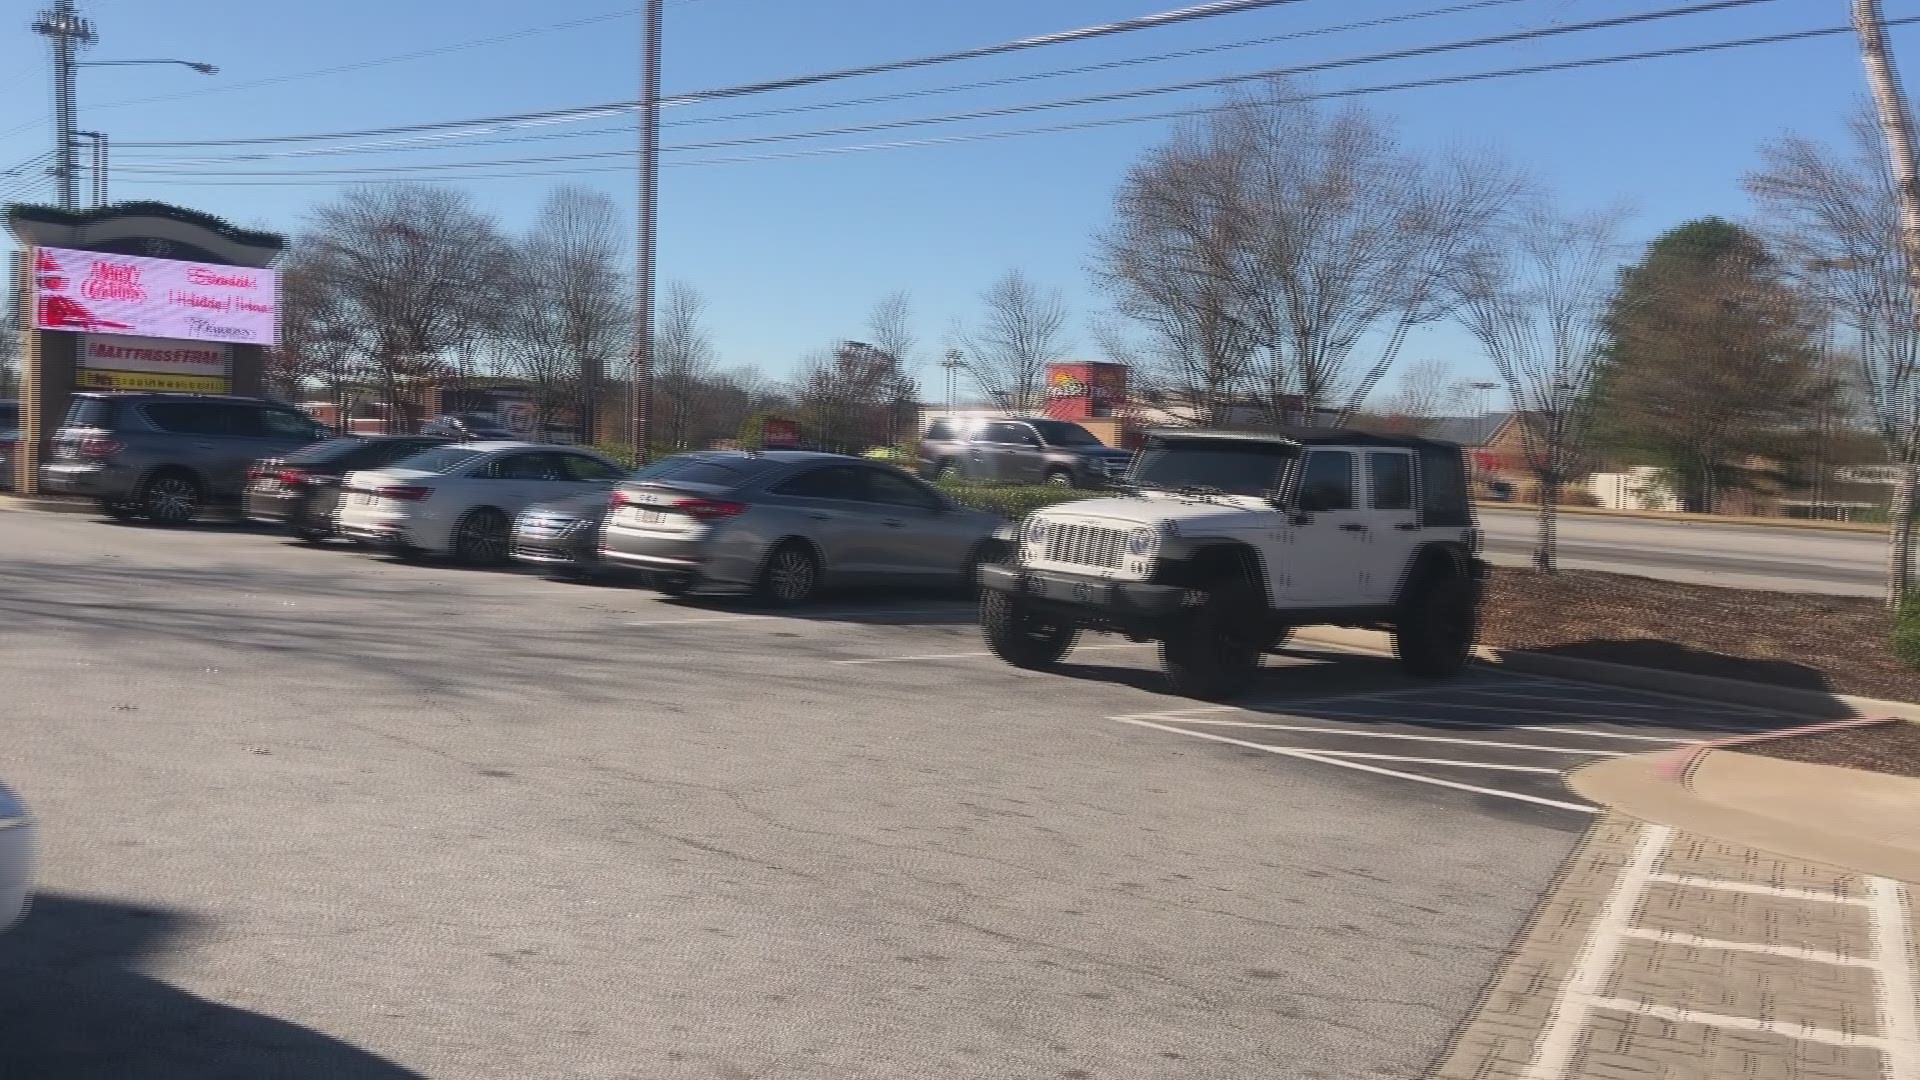 Video of shopping center of Highway 41 and Pharrs Road in Snellville.